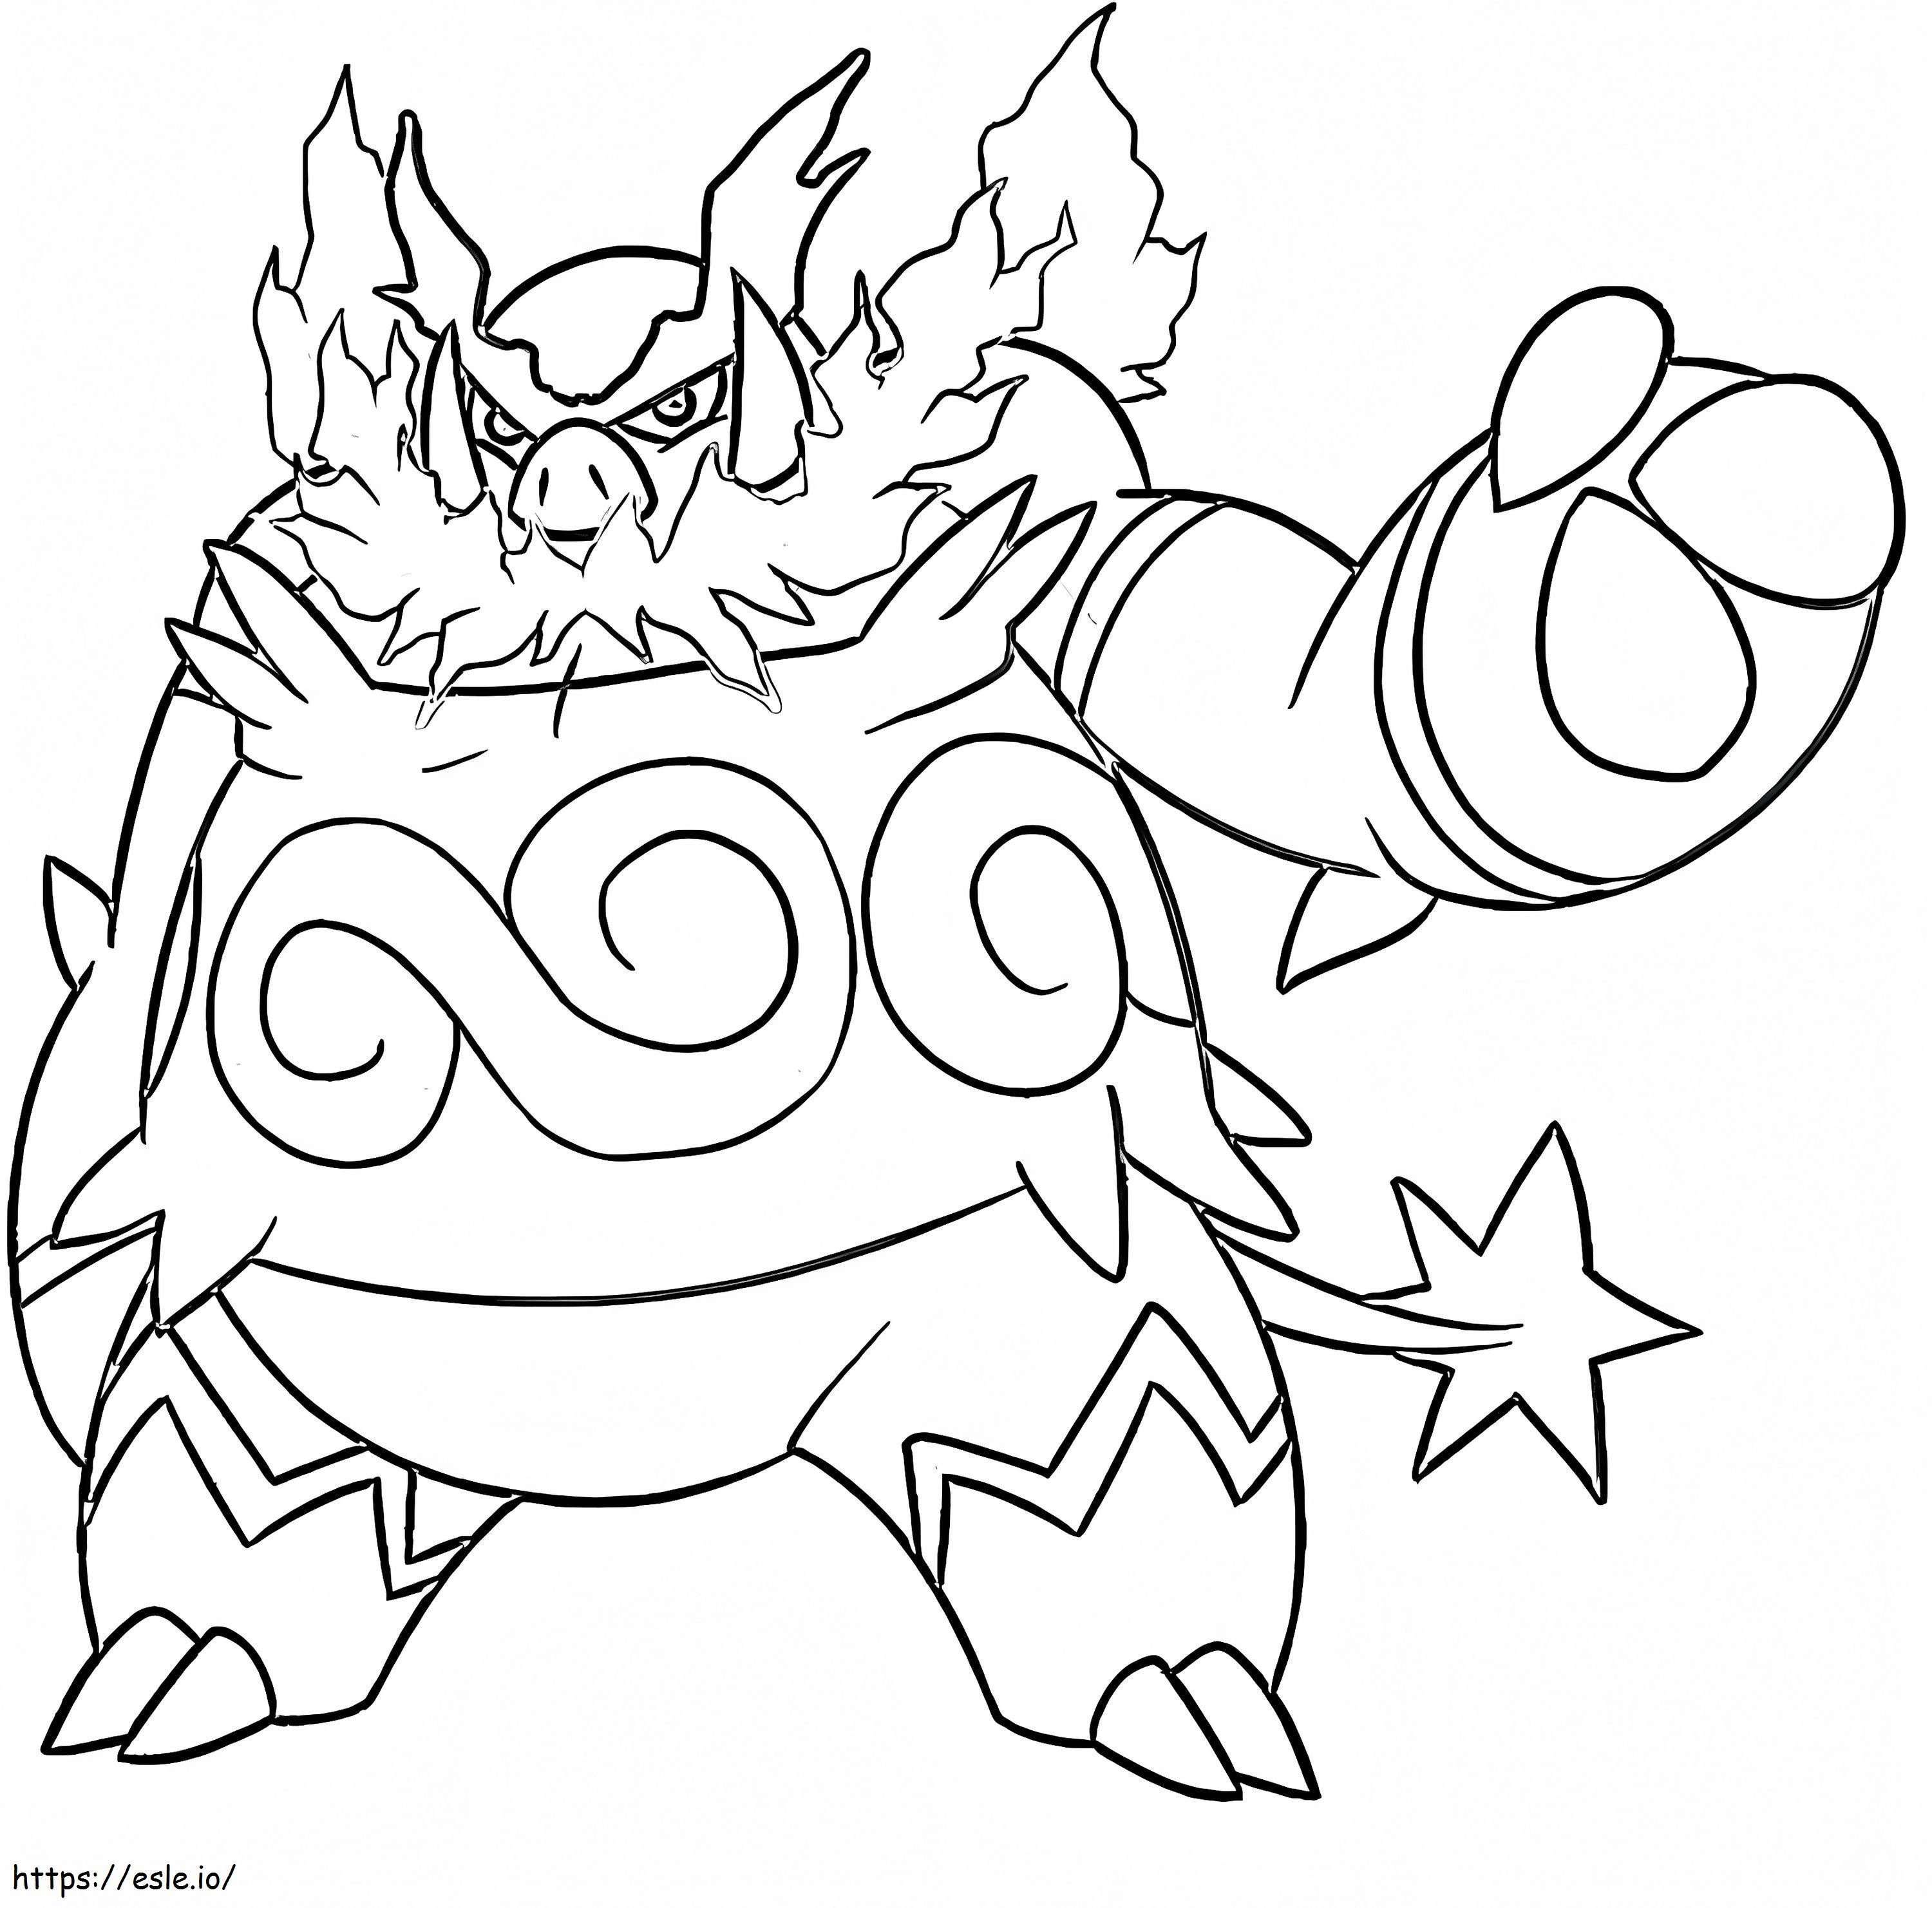 Emboar 4 coloring page